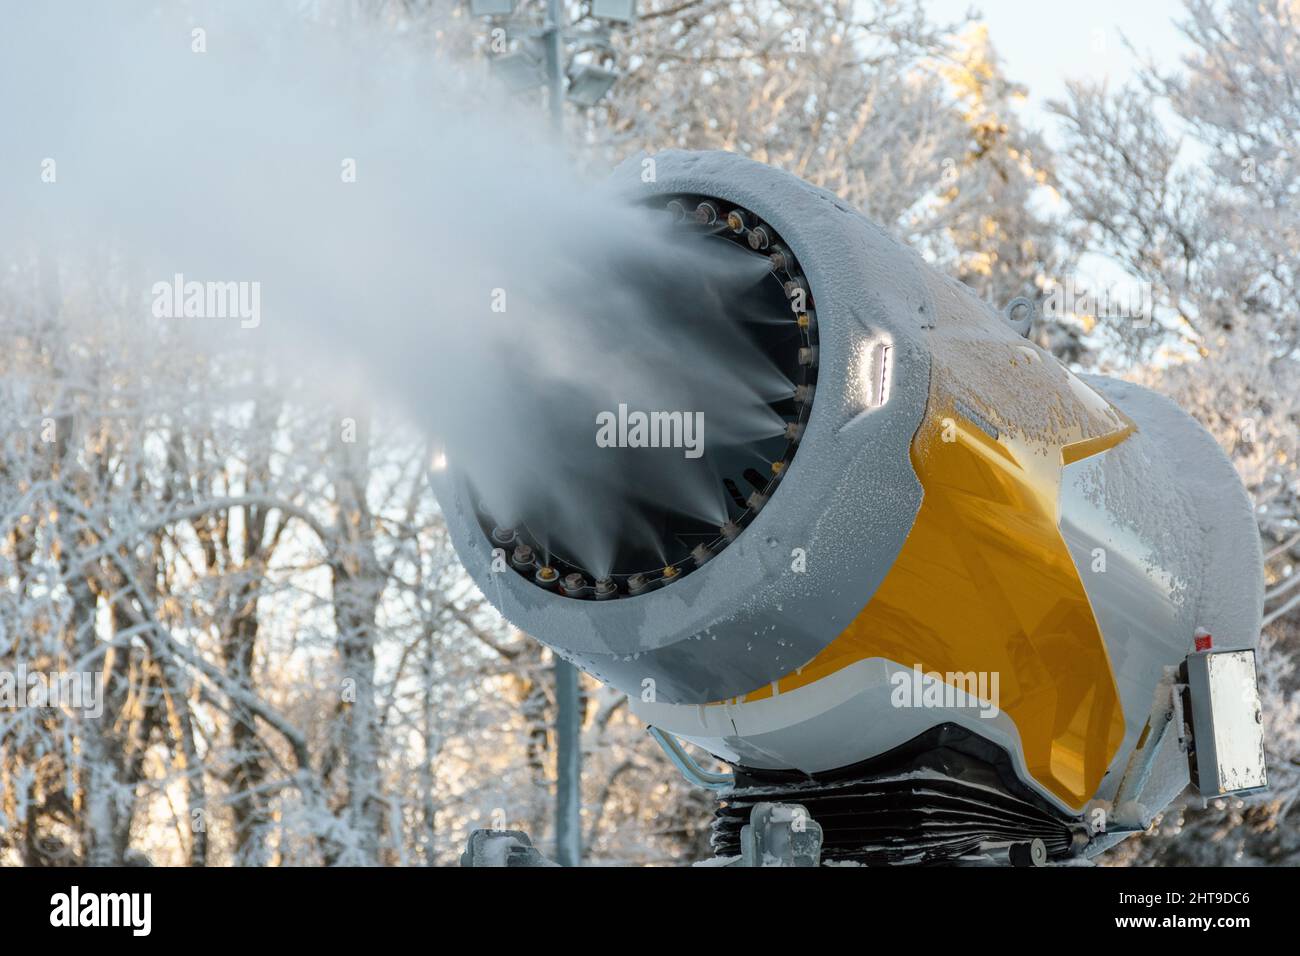 https://c8.alamy.com/comp/2HT9DC6/closeup-of-yellow-snow-cannon-or-artificial-snowmaking-machine-in-action-on-a-cold-winter-day-2HT9DC6.jpg